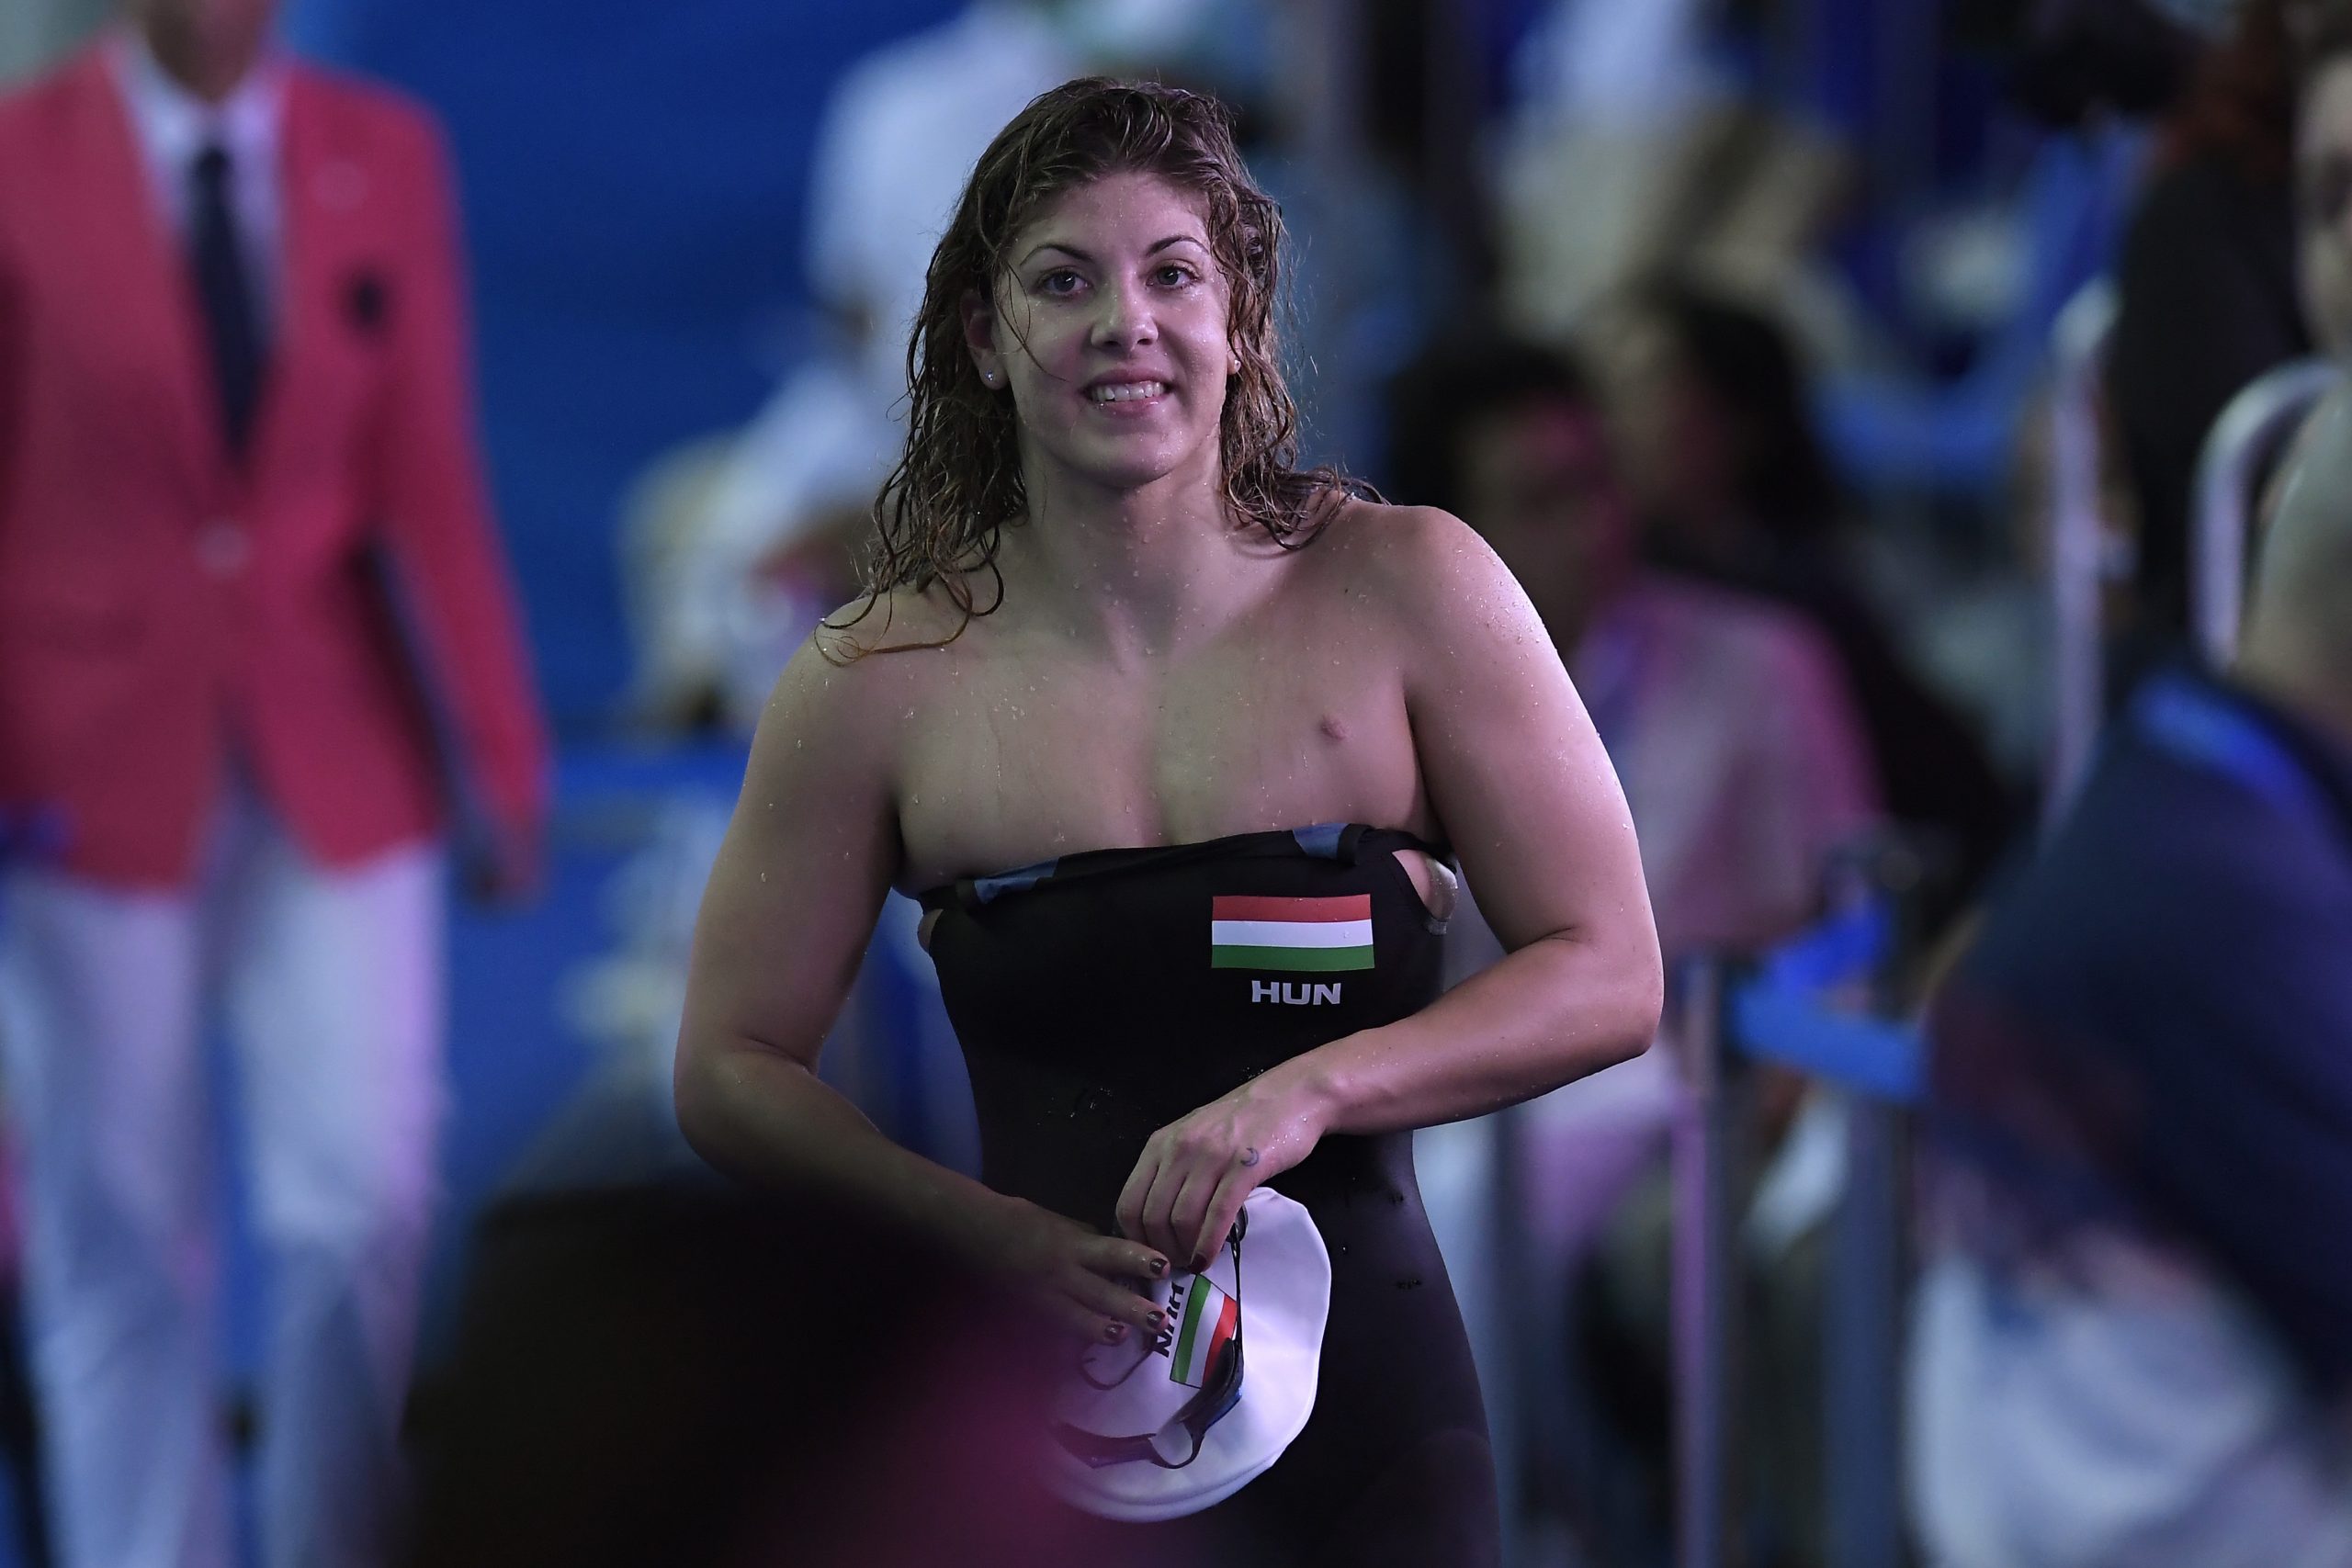 Federation's Committee Finds Abused Swimmer Liliána Szilágyi Told the Truth